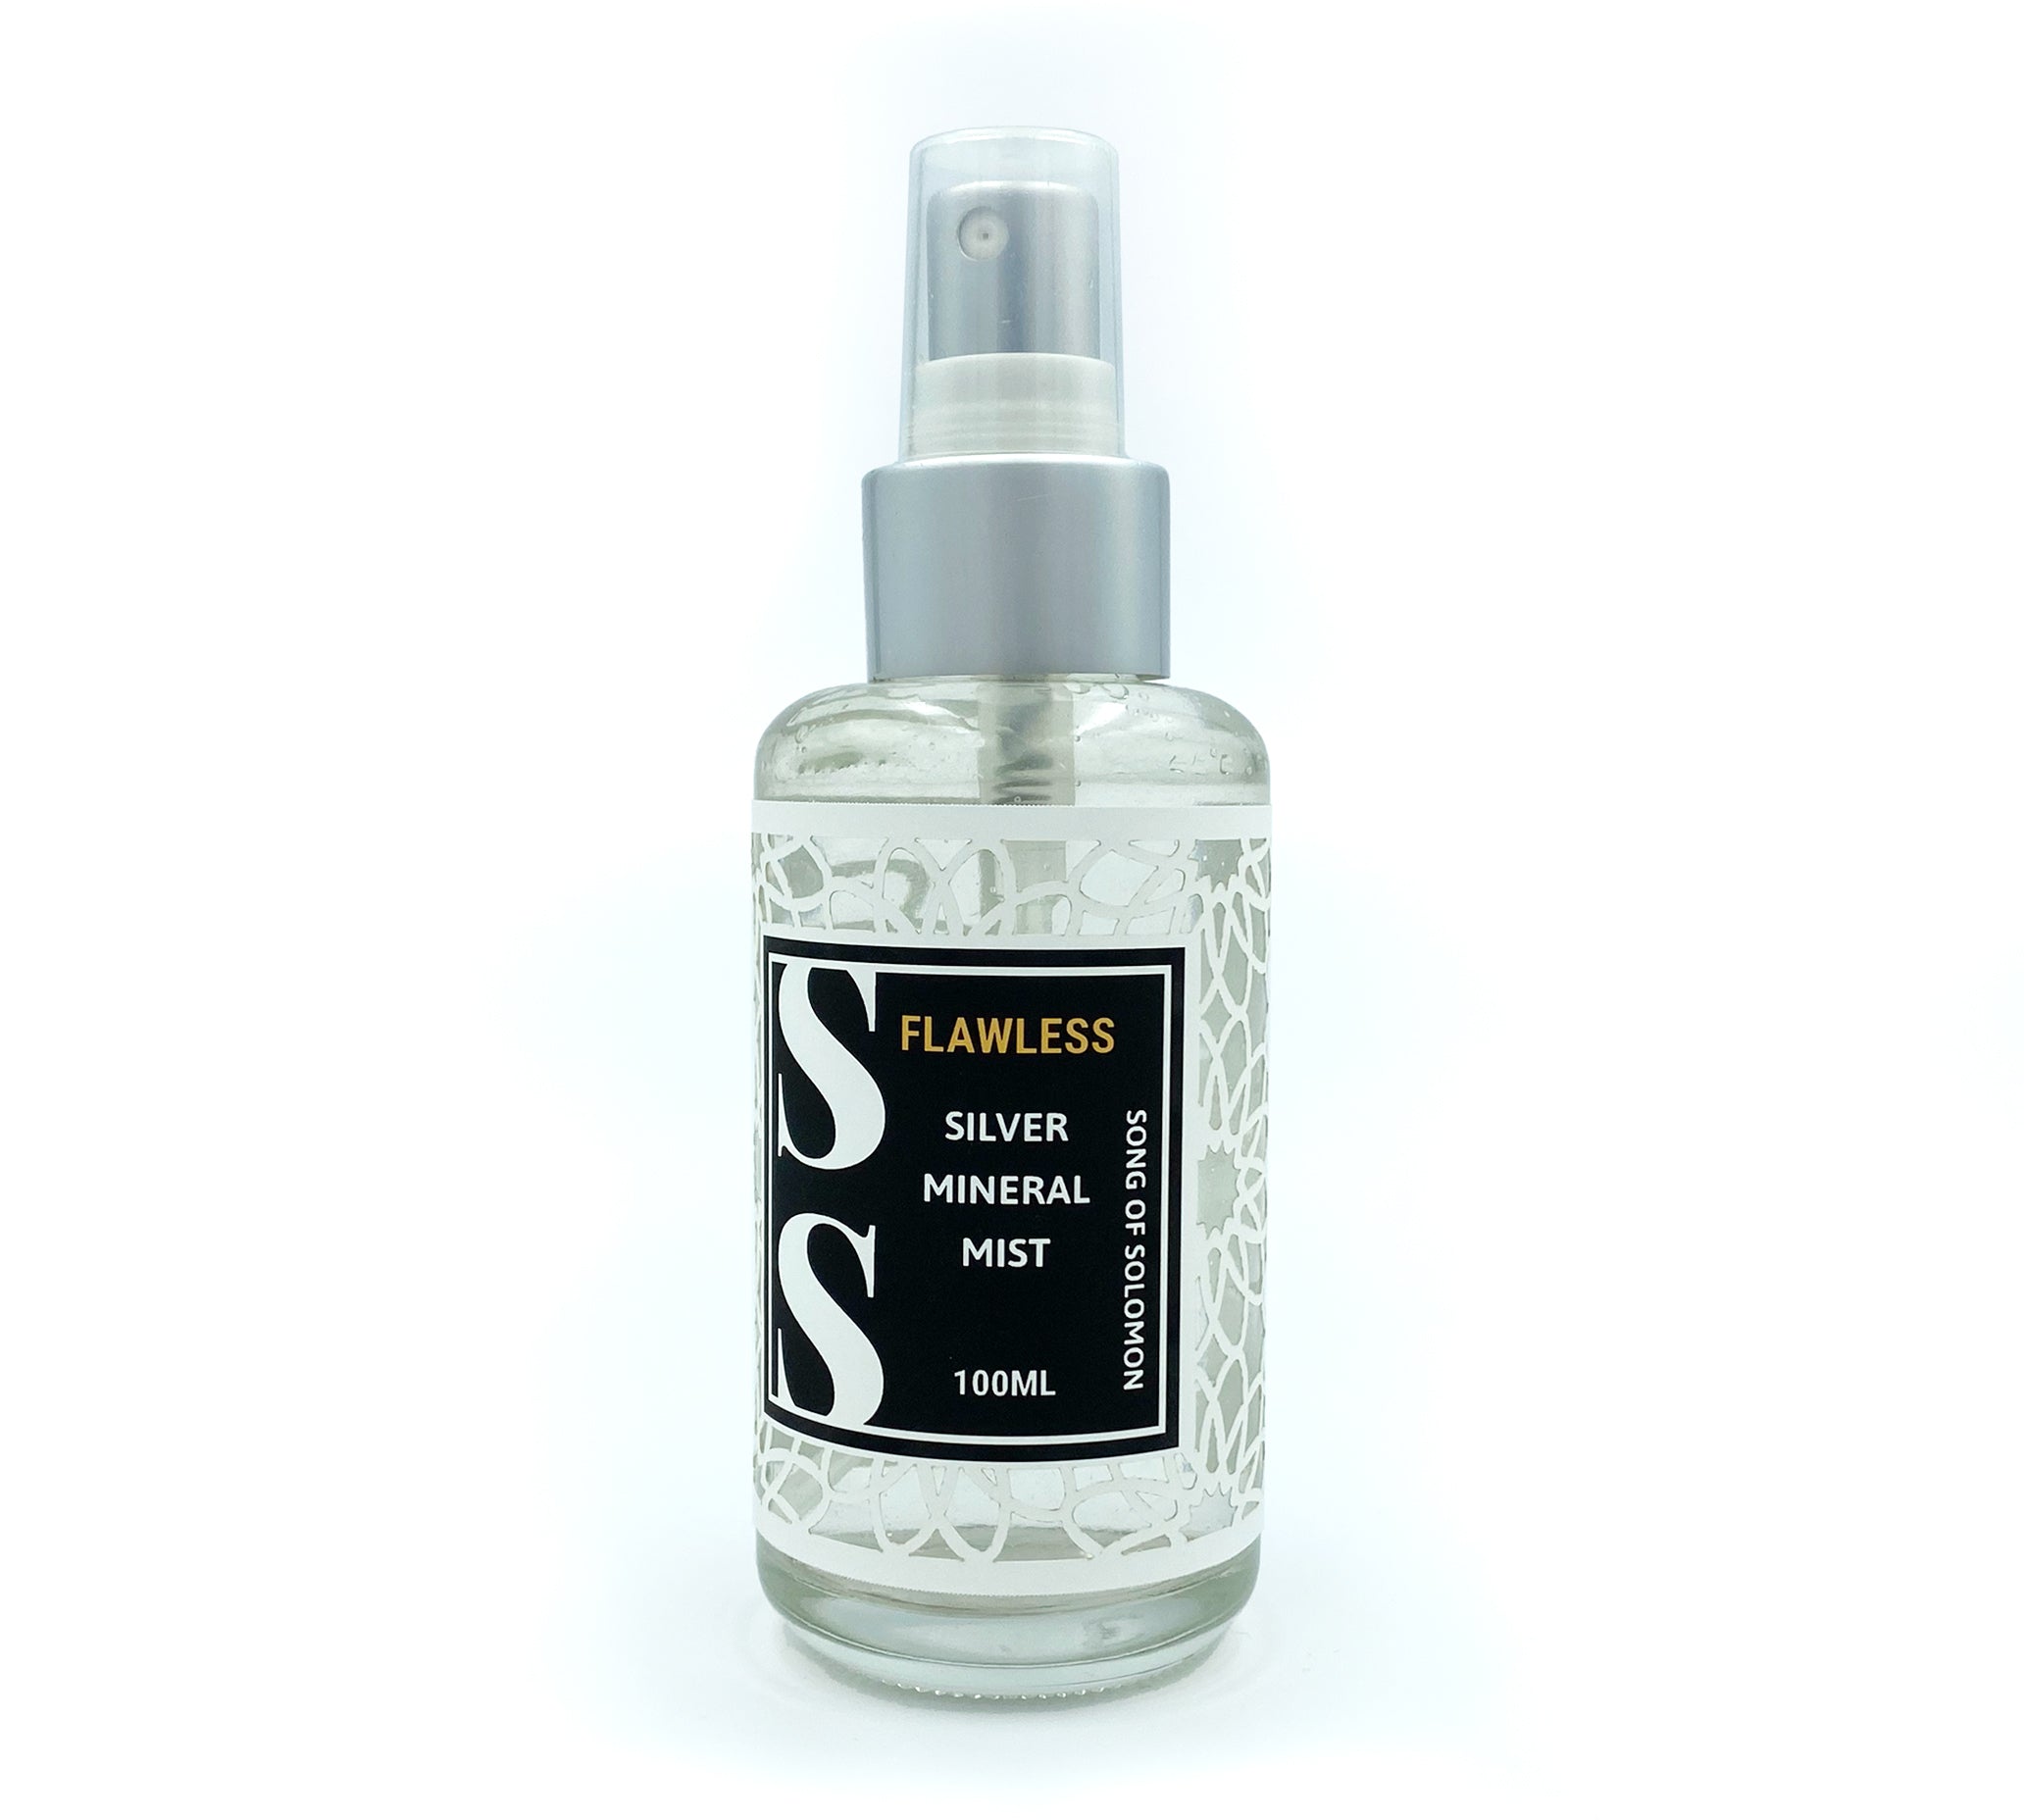 "Flawless" Silver Mineral Mist Toner (for oily or problematic skin)